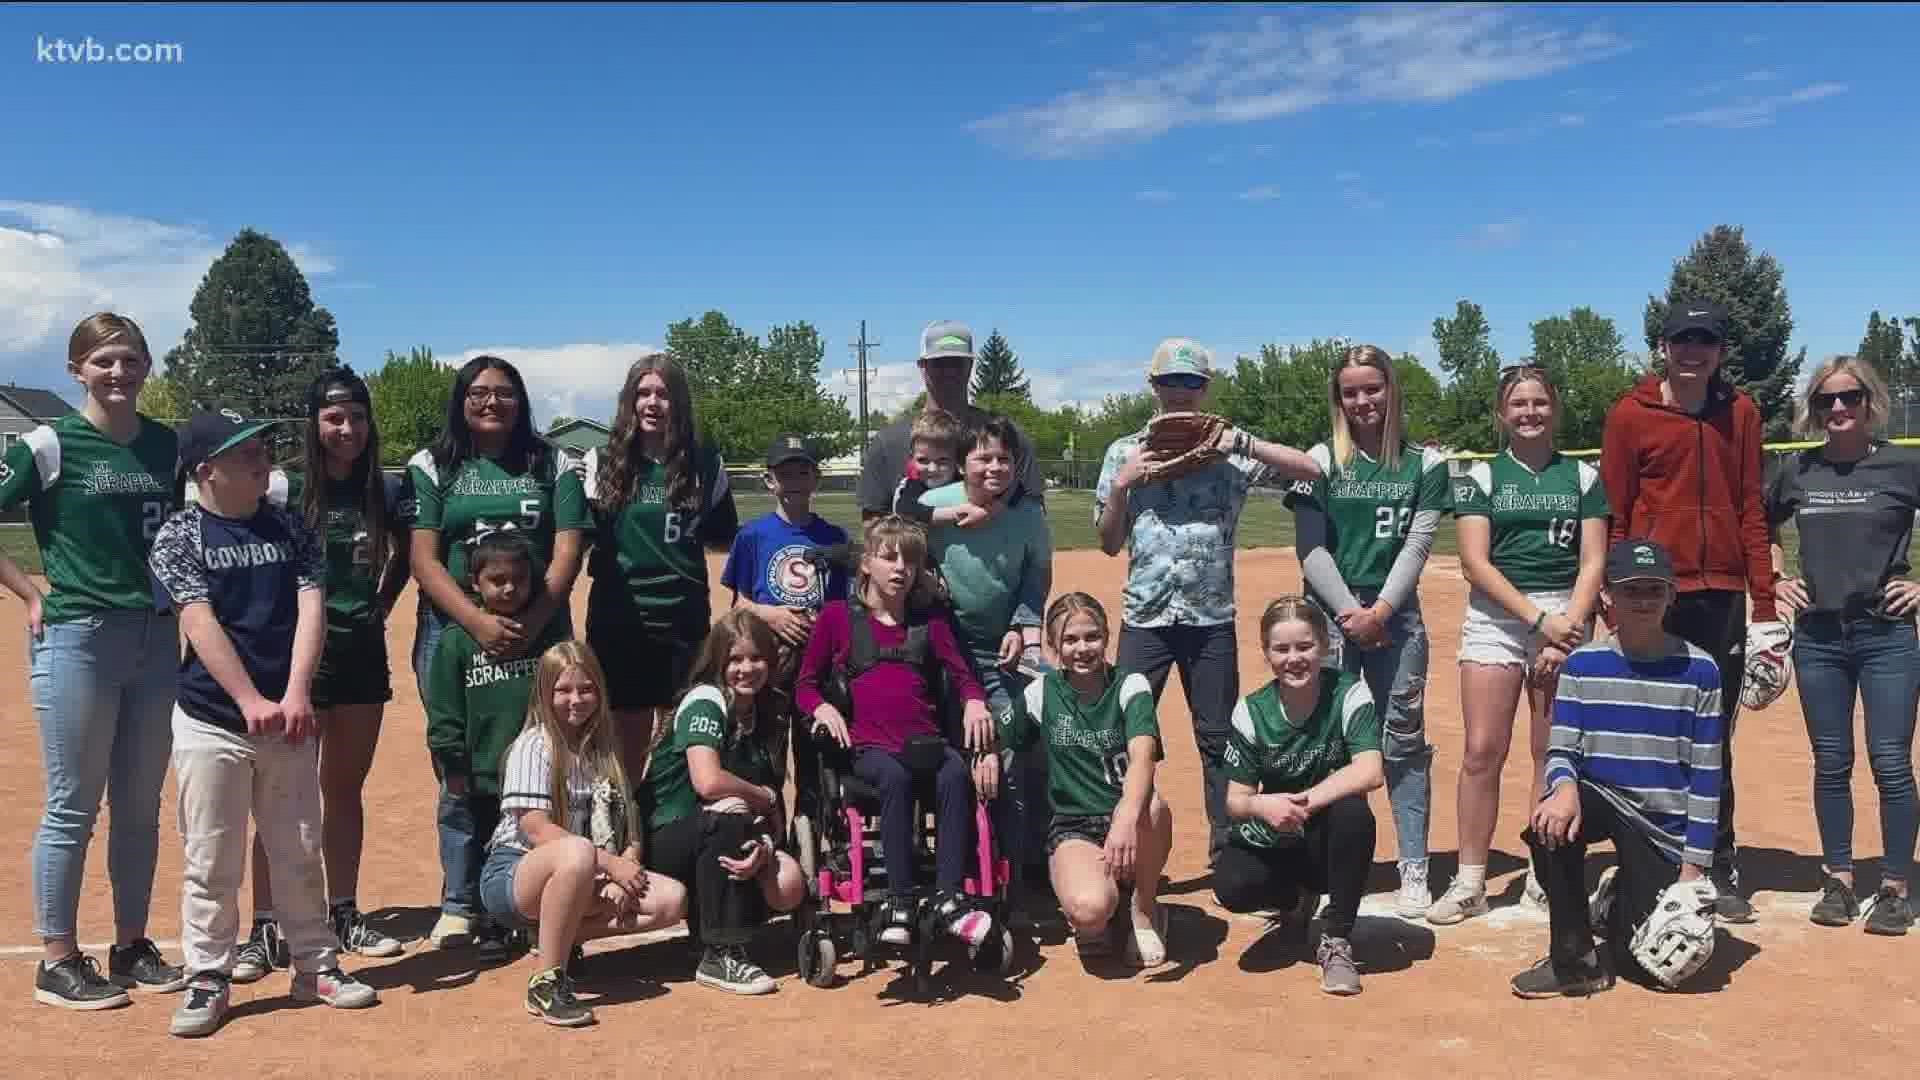 The Kuna Club softball team organized a game for the special needs community called Softball & Snow Cones. Their dream is to create a special league in the future.